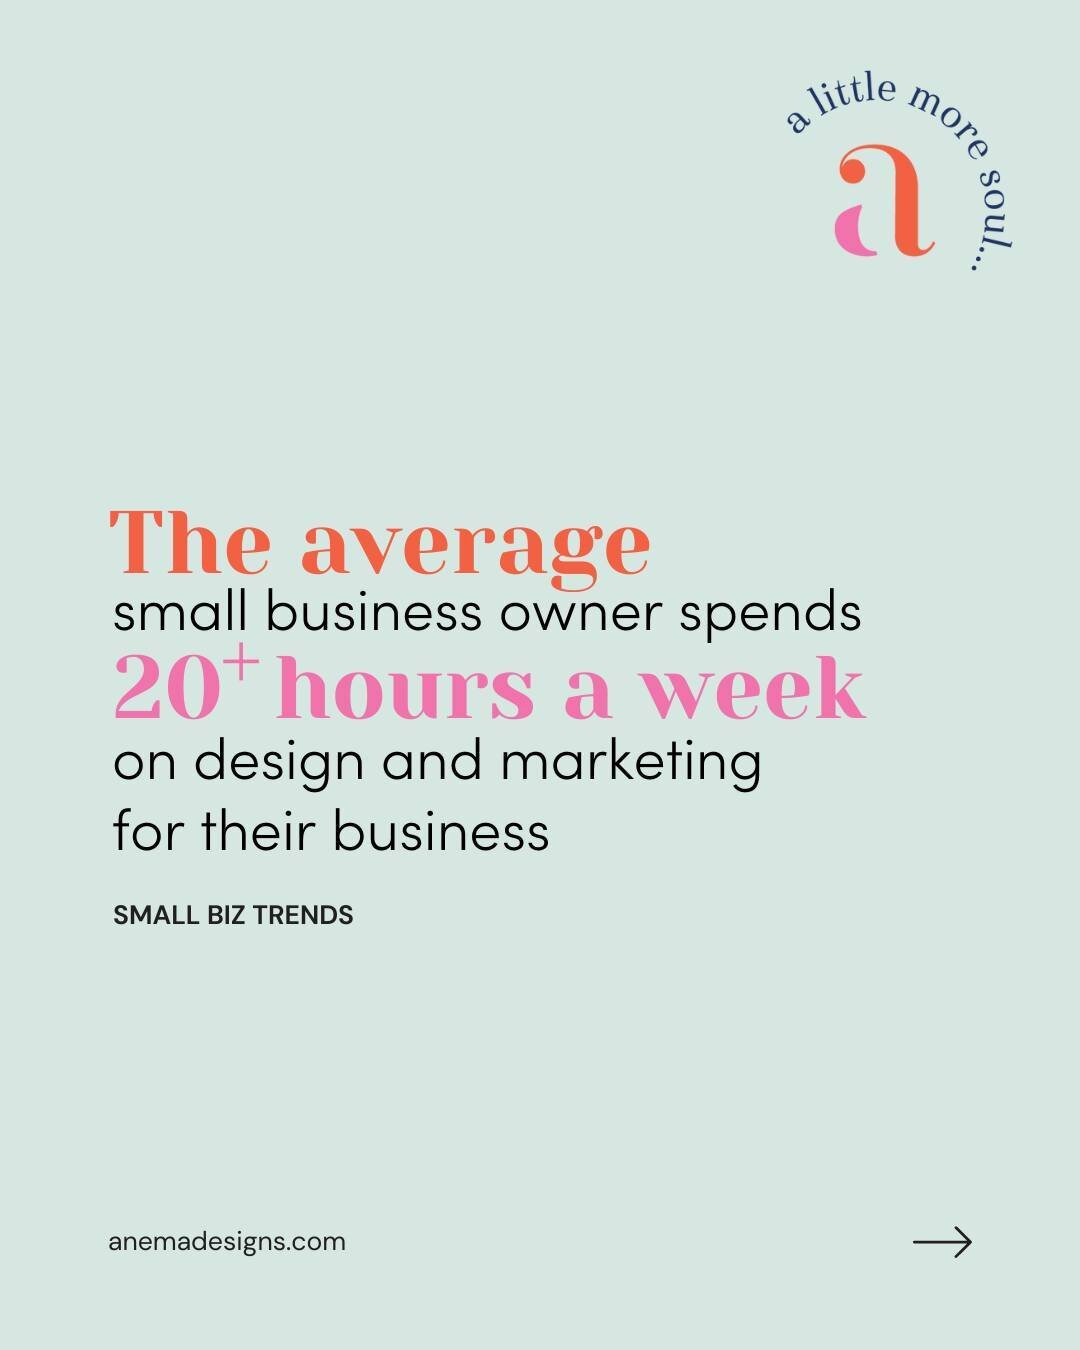 Unlock more time and greater impact with a brand designer!

Did you know that the average small business owner spends over 20 hours per week on design and marketing? 

Imagine reclaiming that time for what truly matters: growing your business and doi